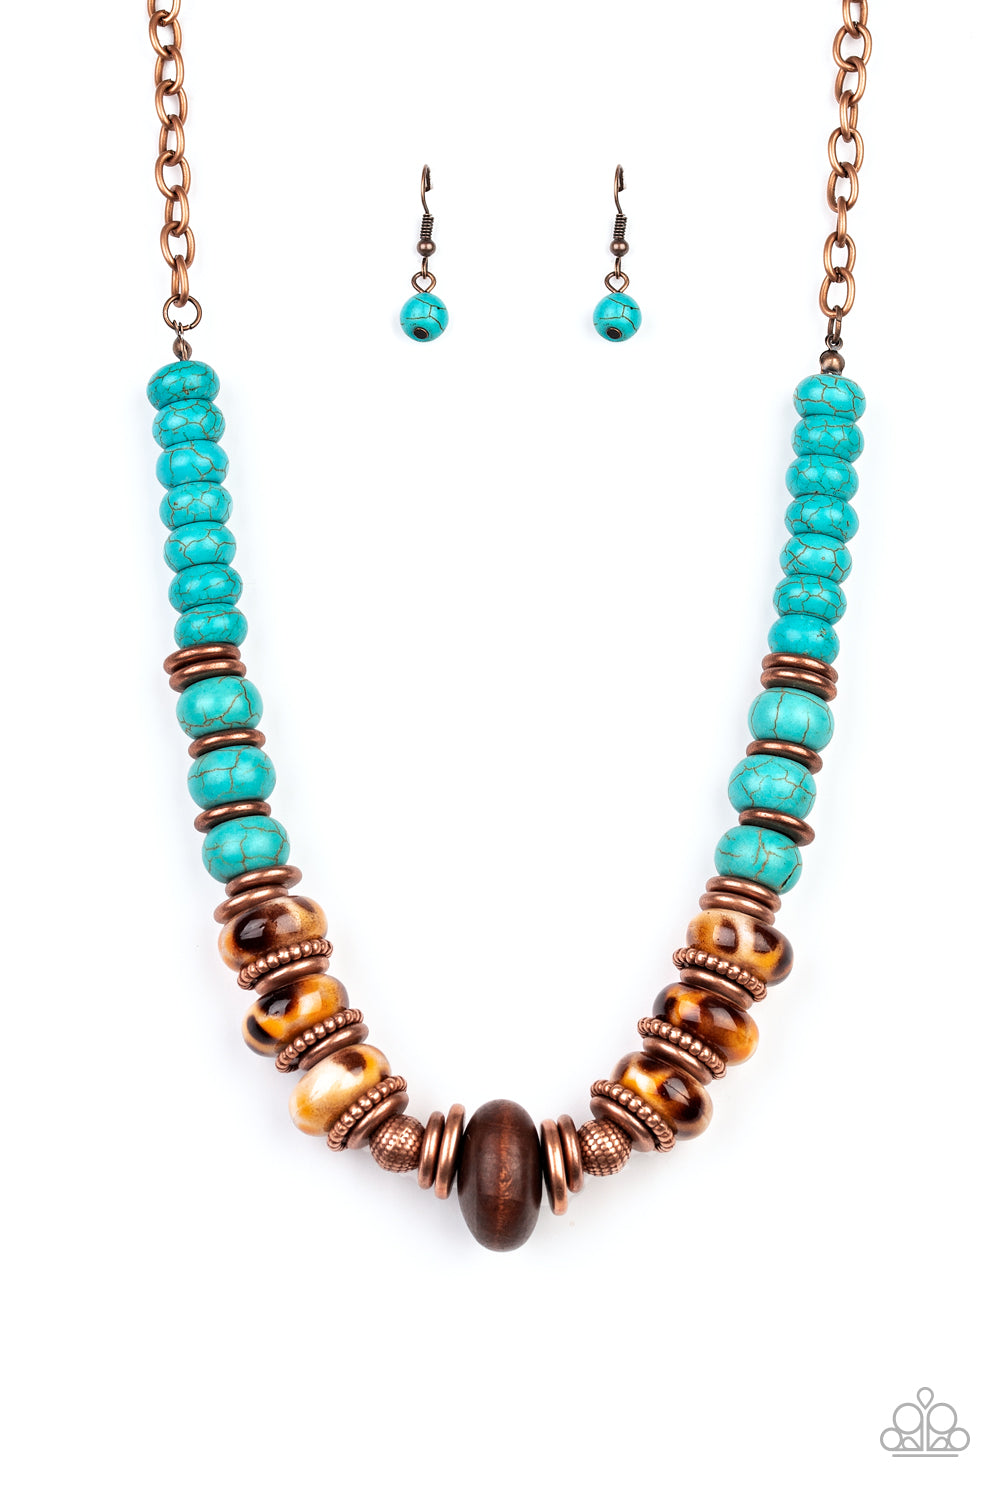 shop-sassy-affordable- desert-tranquility-copper-paparazzi-accessories